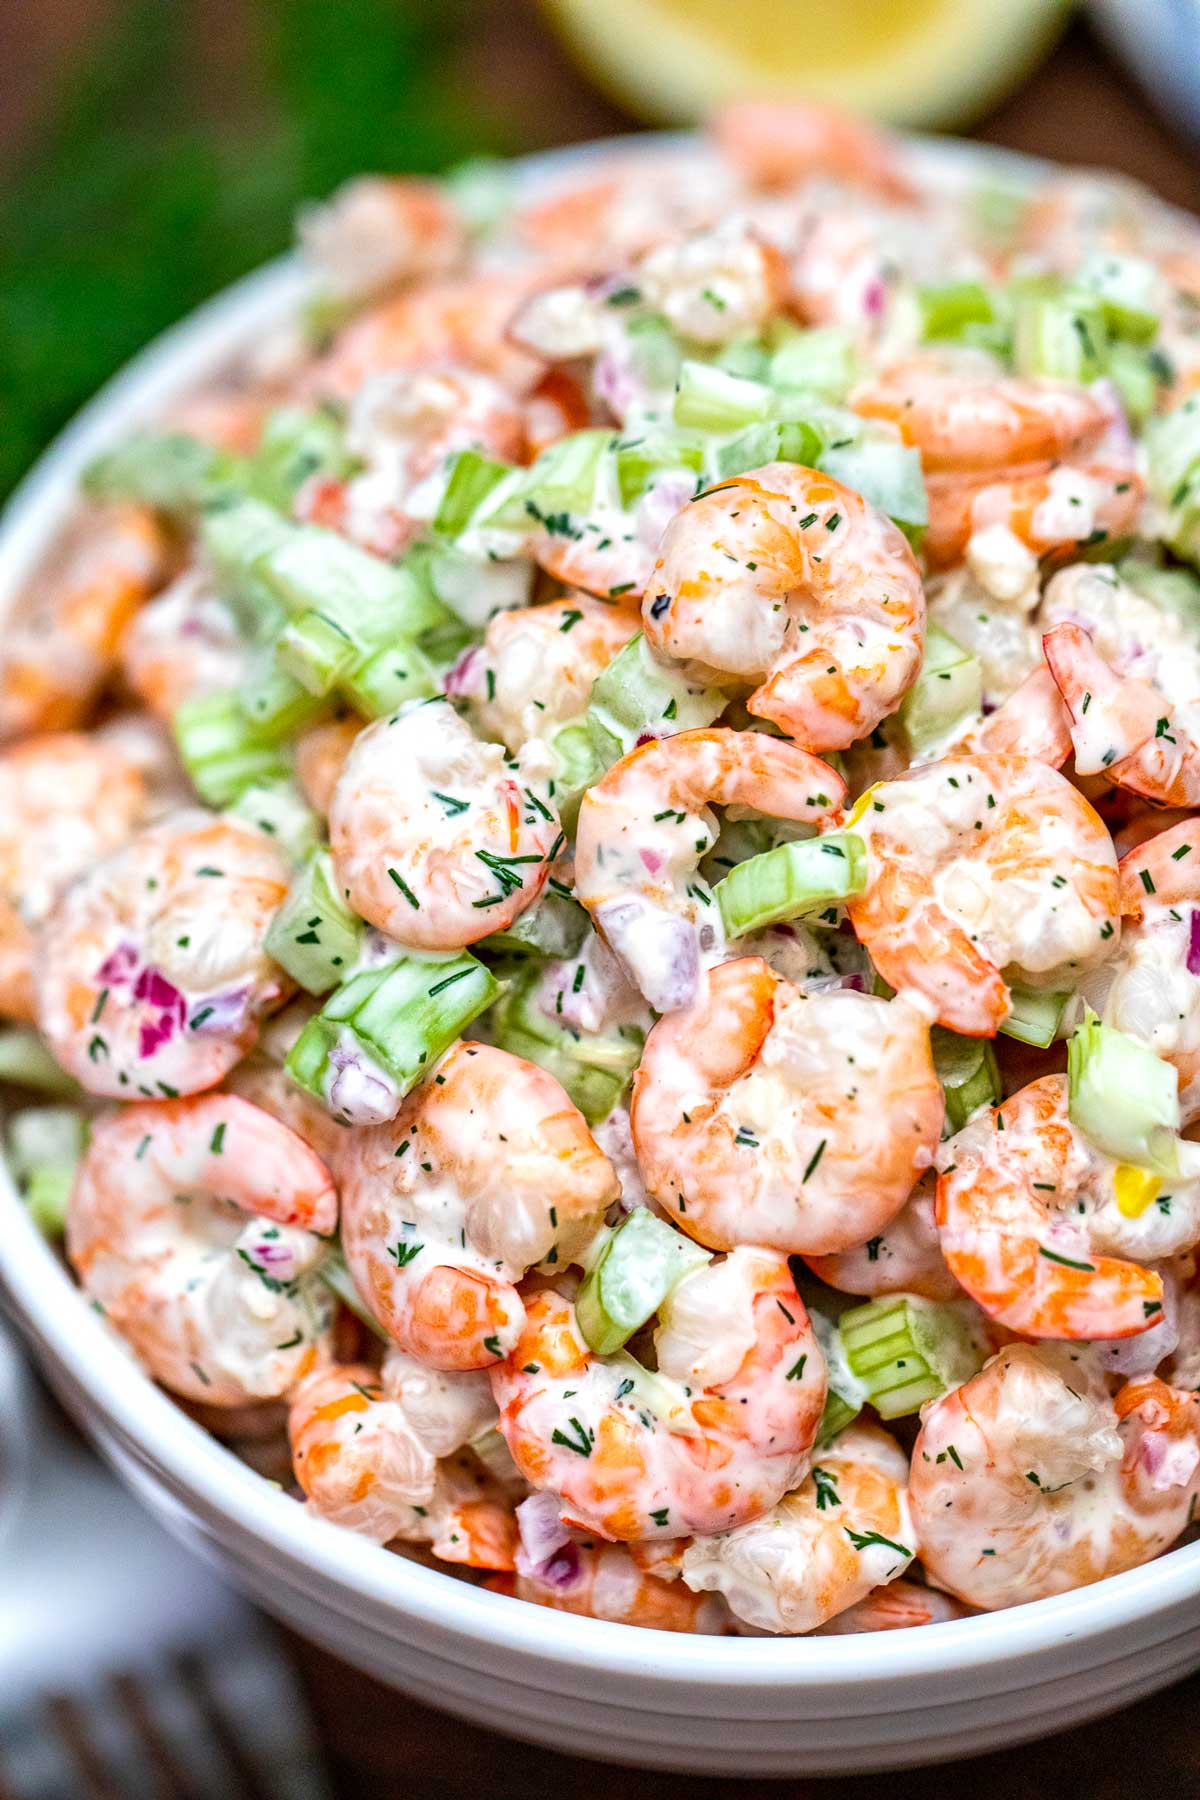 Easy Shrimp Salad Recipe with Simple Ingredients